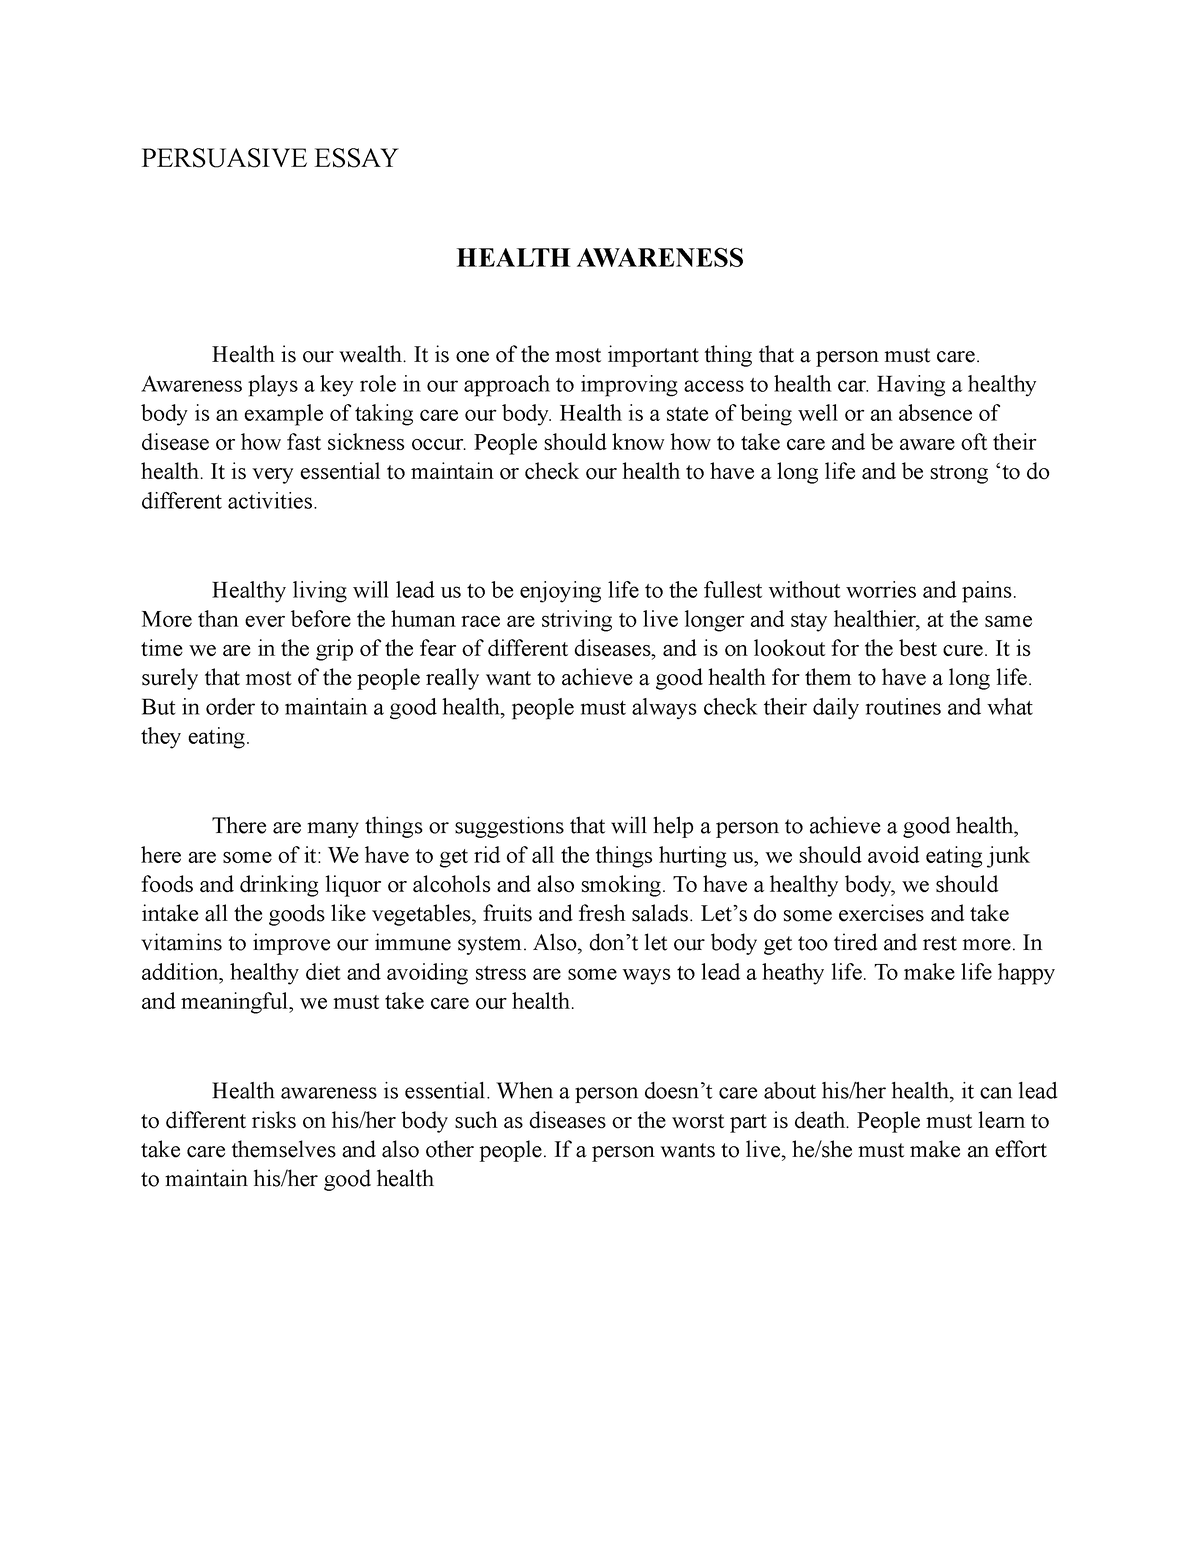 a persuasive essay about health awareness